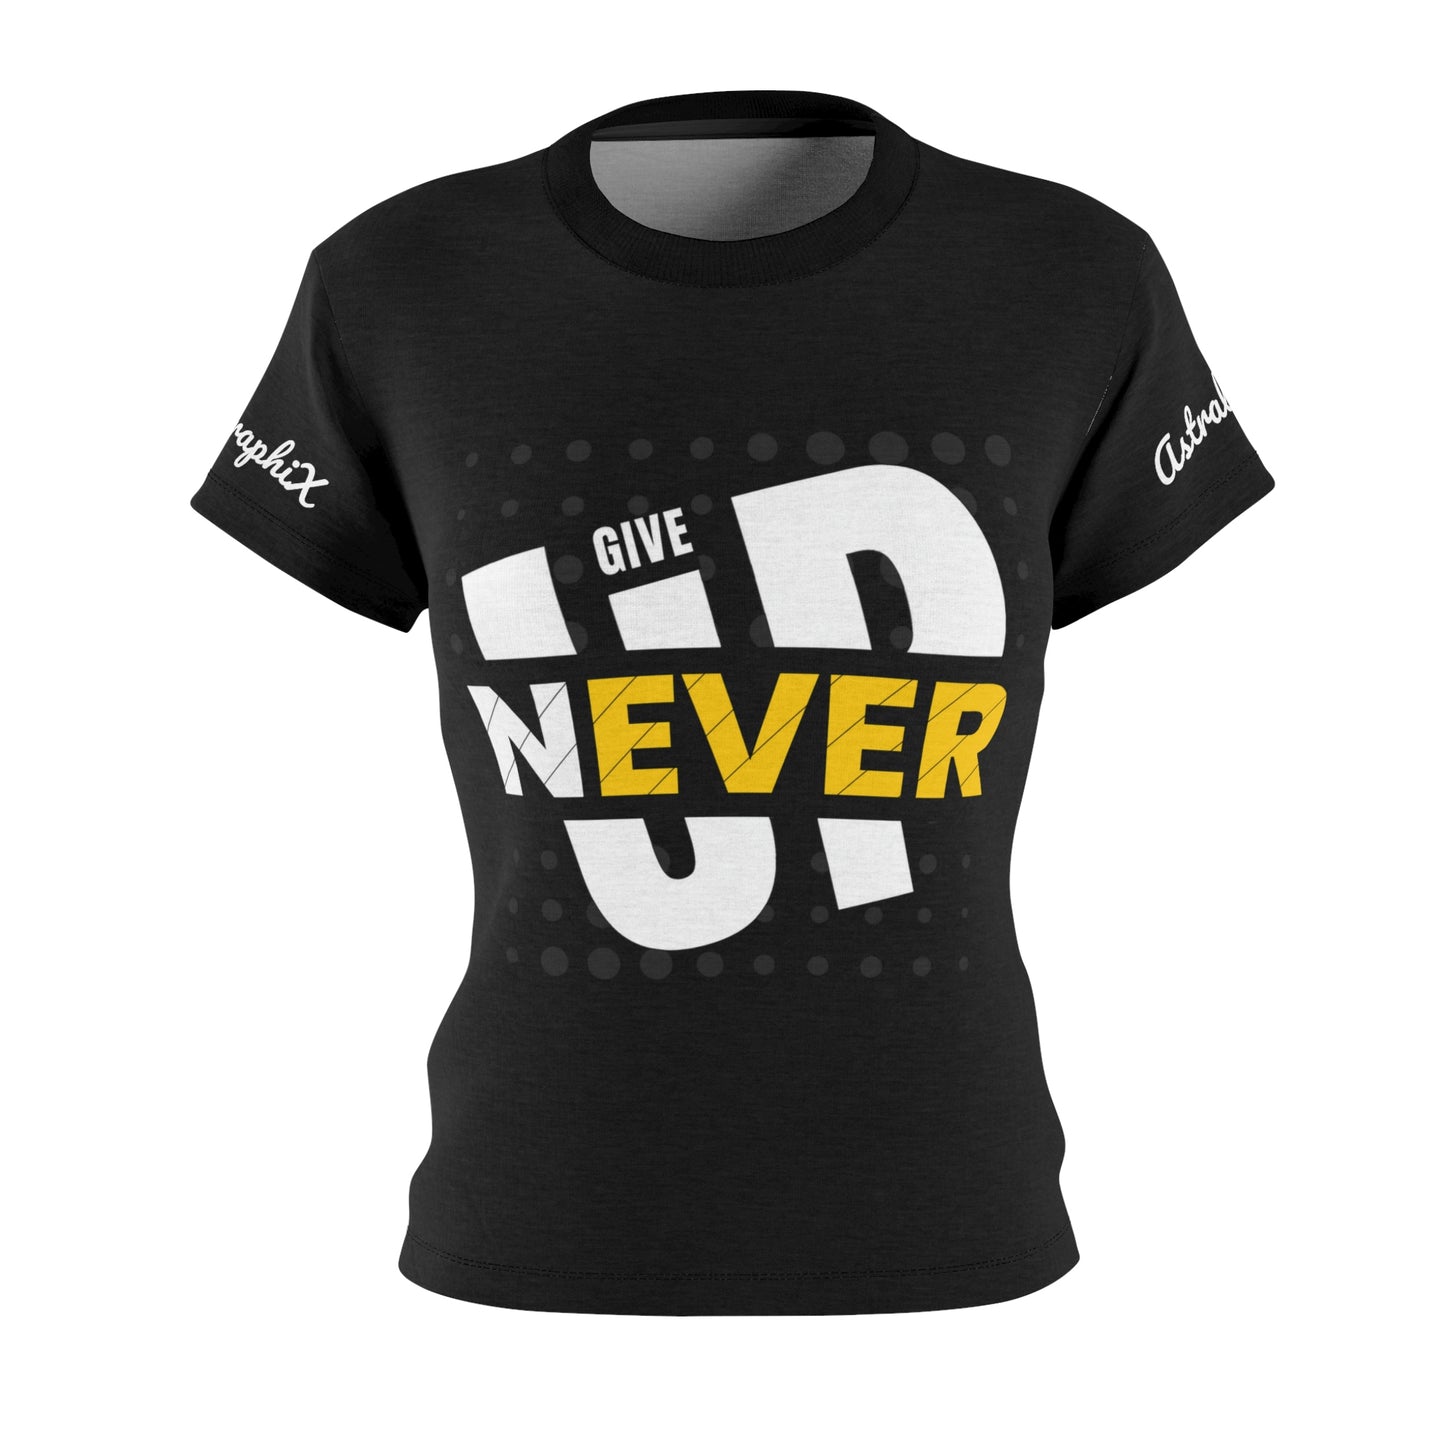 Word Art Collection - Women's Cut & Sew Tee (AOP) - Never Give Up in Black